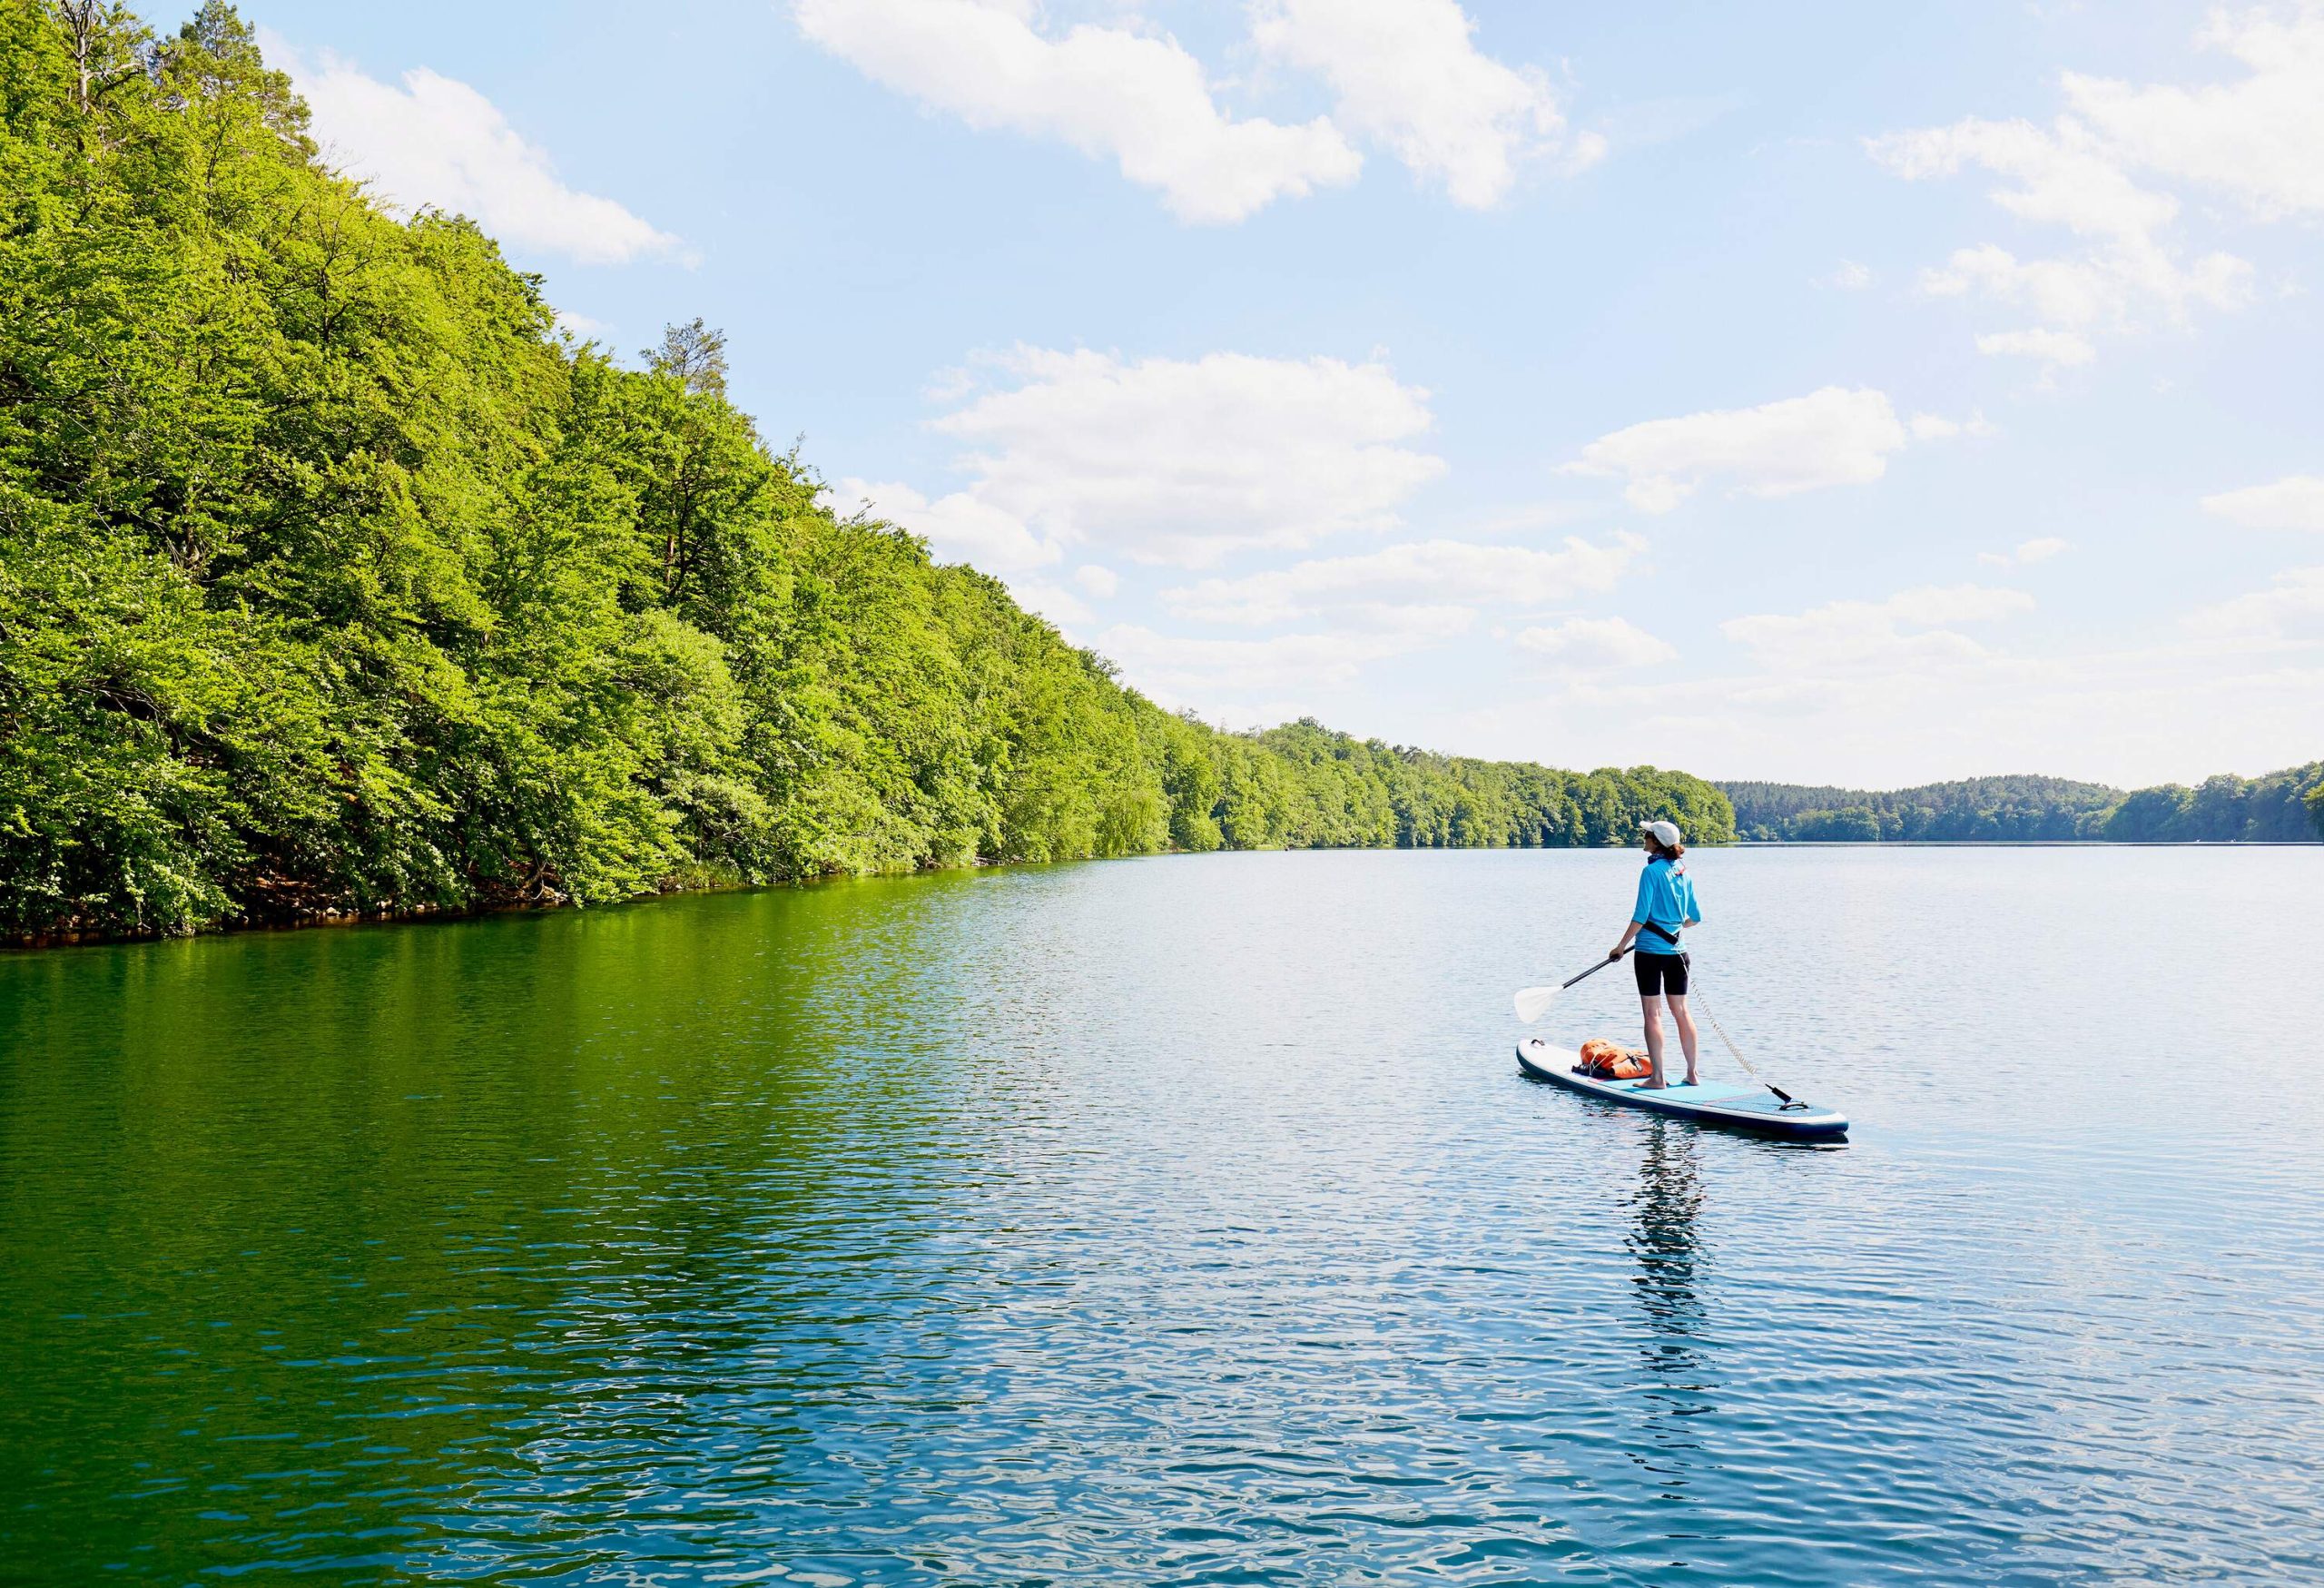 A woman paddleboarding across a calm lake circled by densely forested hills.